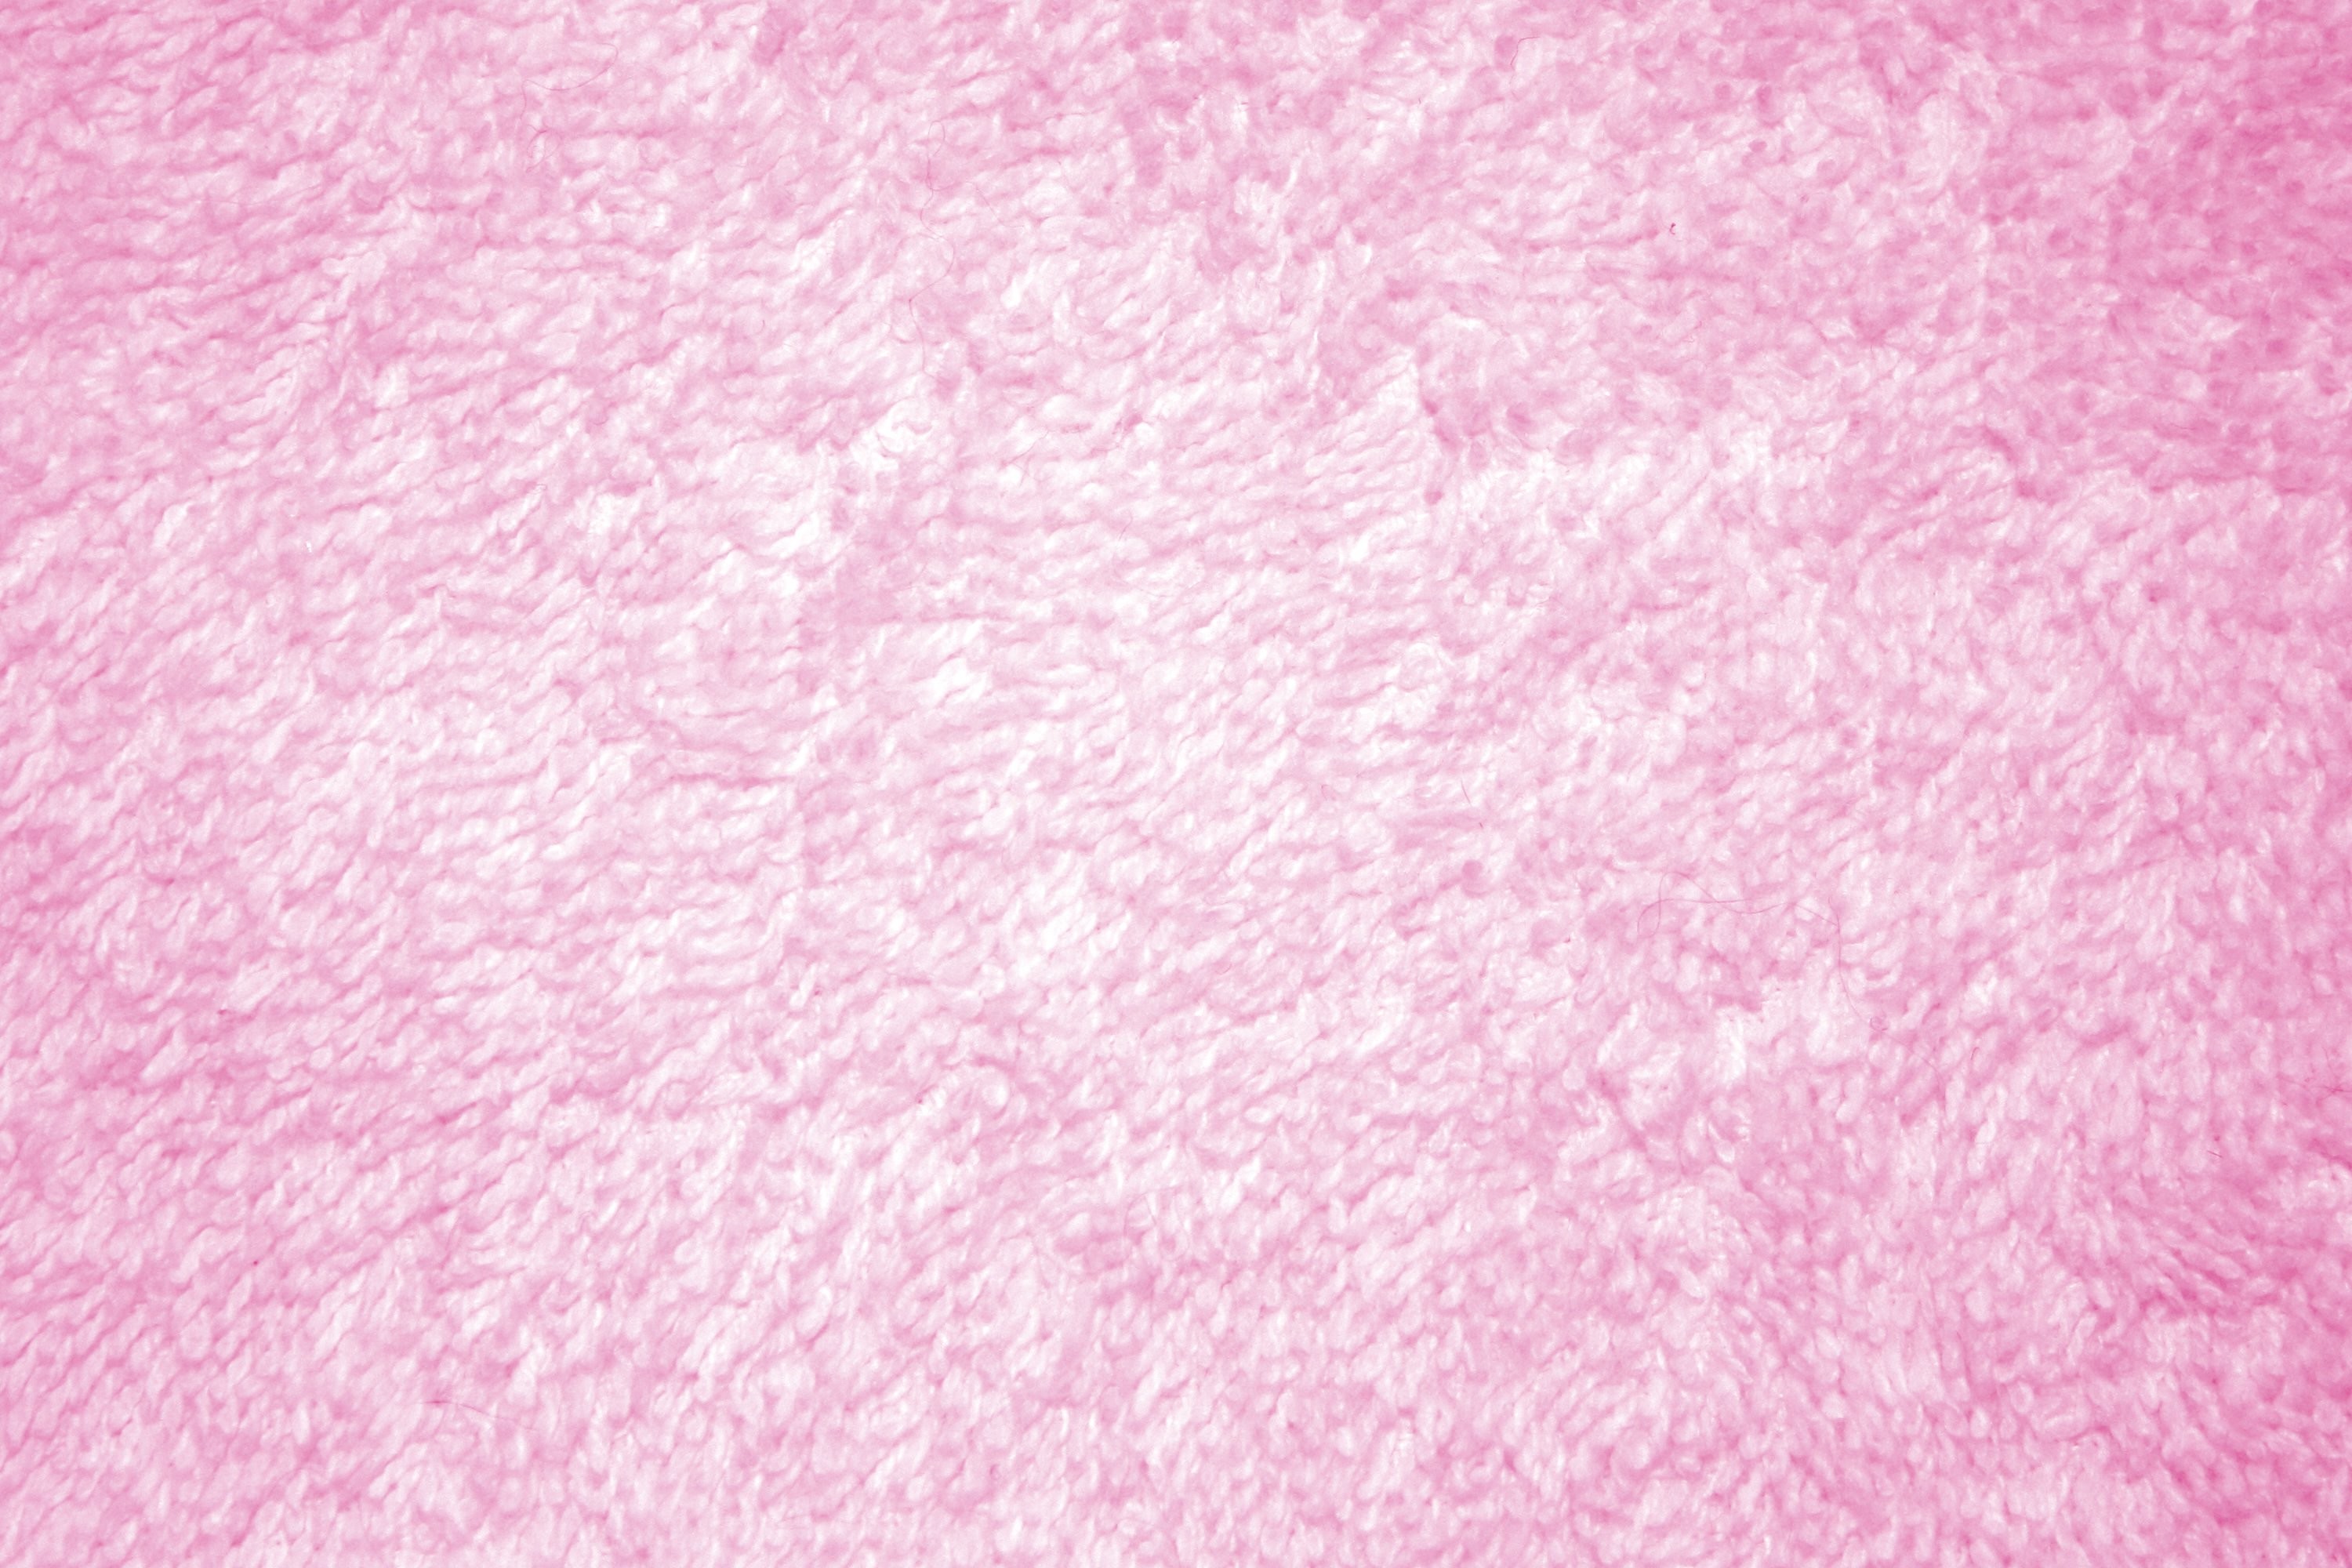 3000x2000 Pink Terry Cloth Texture Picture | Free Photograph | Photos Public .